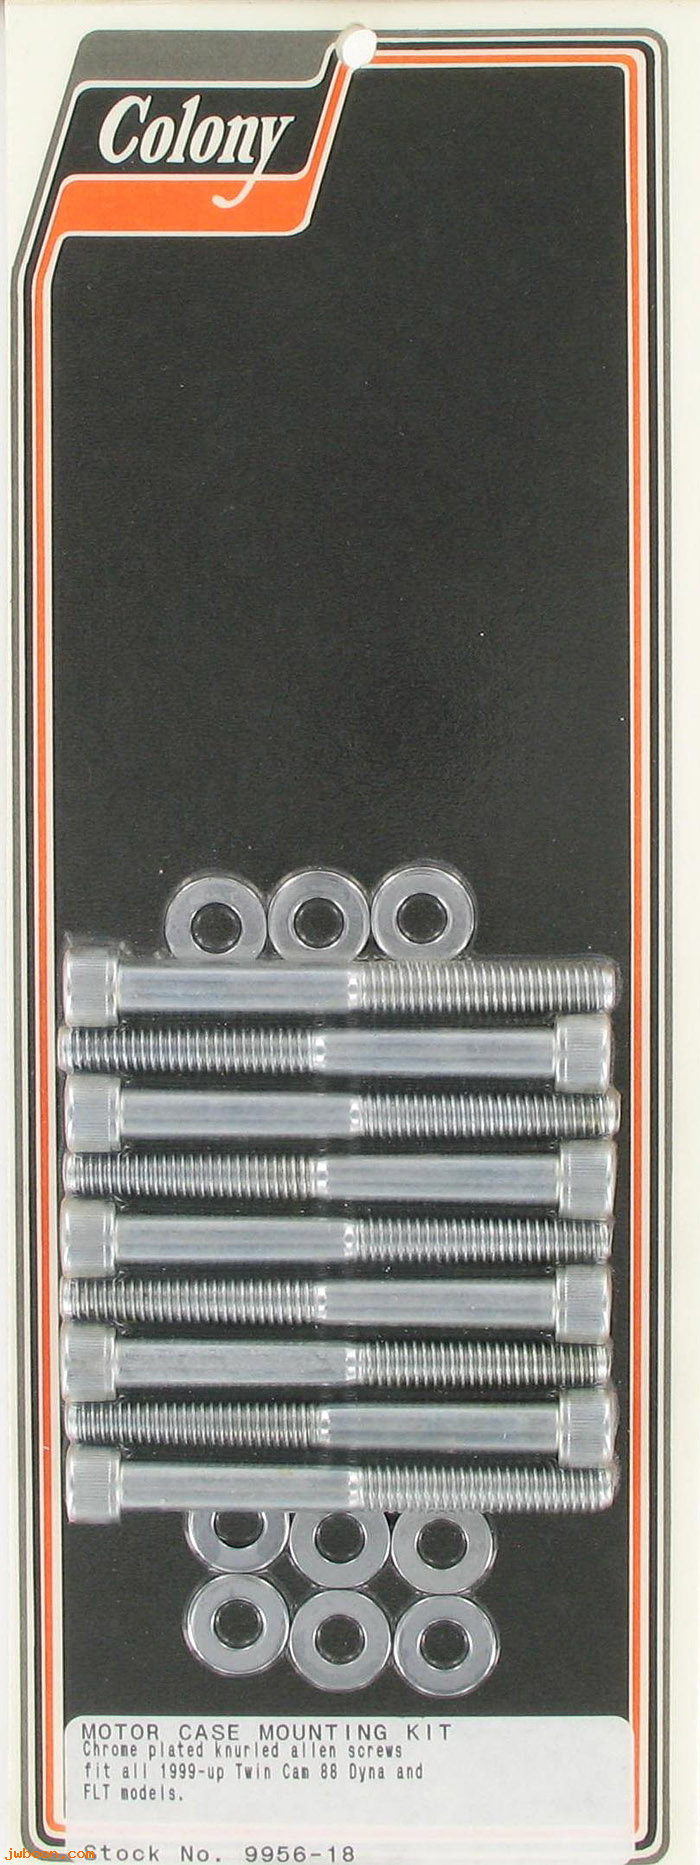 C 9956-18 (): Motor case mounting kit, knurled Allen - Twin Cam 88, in stock